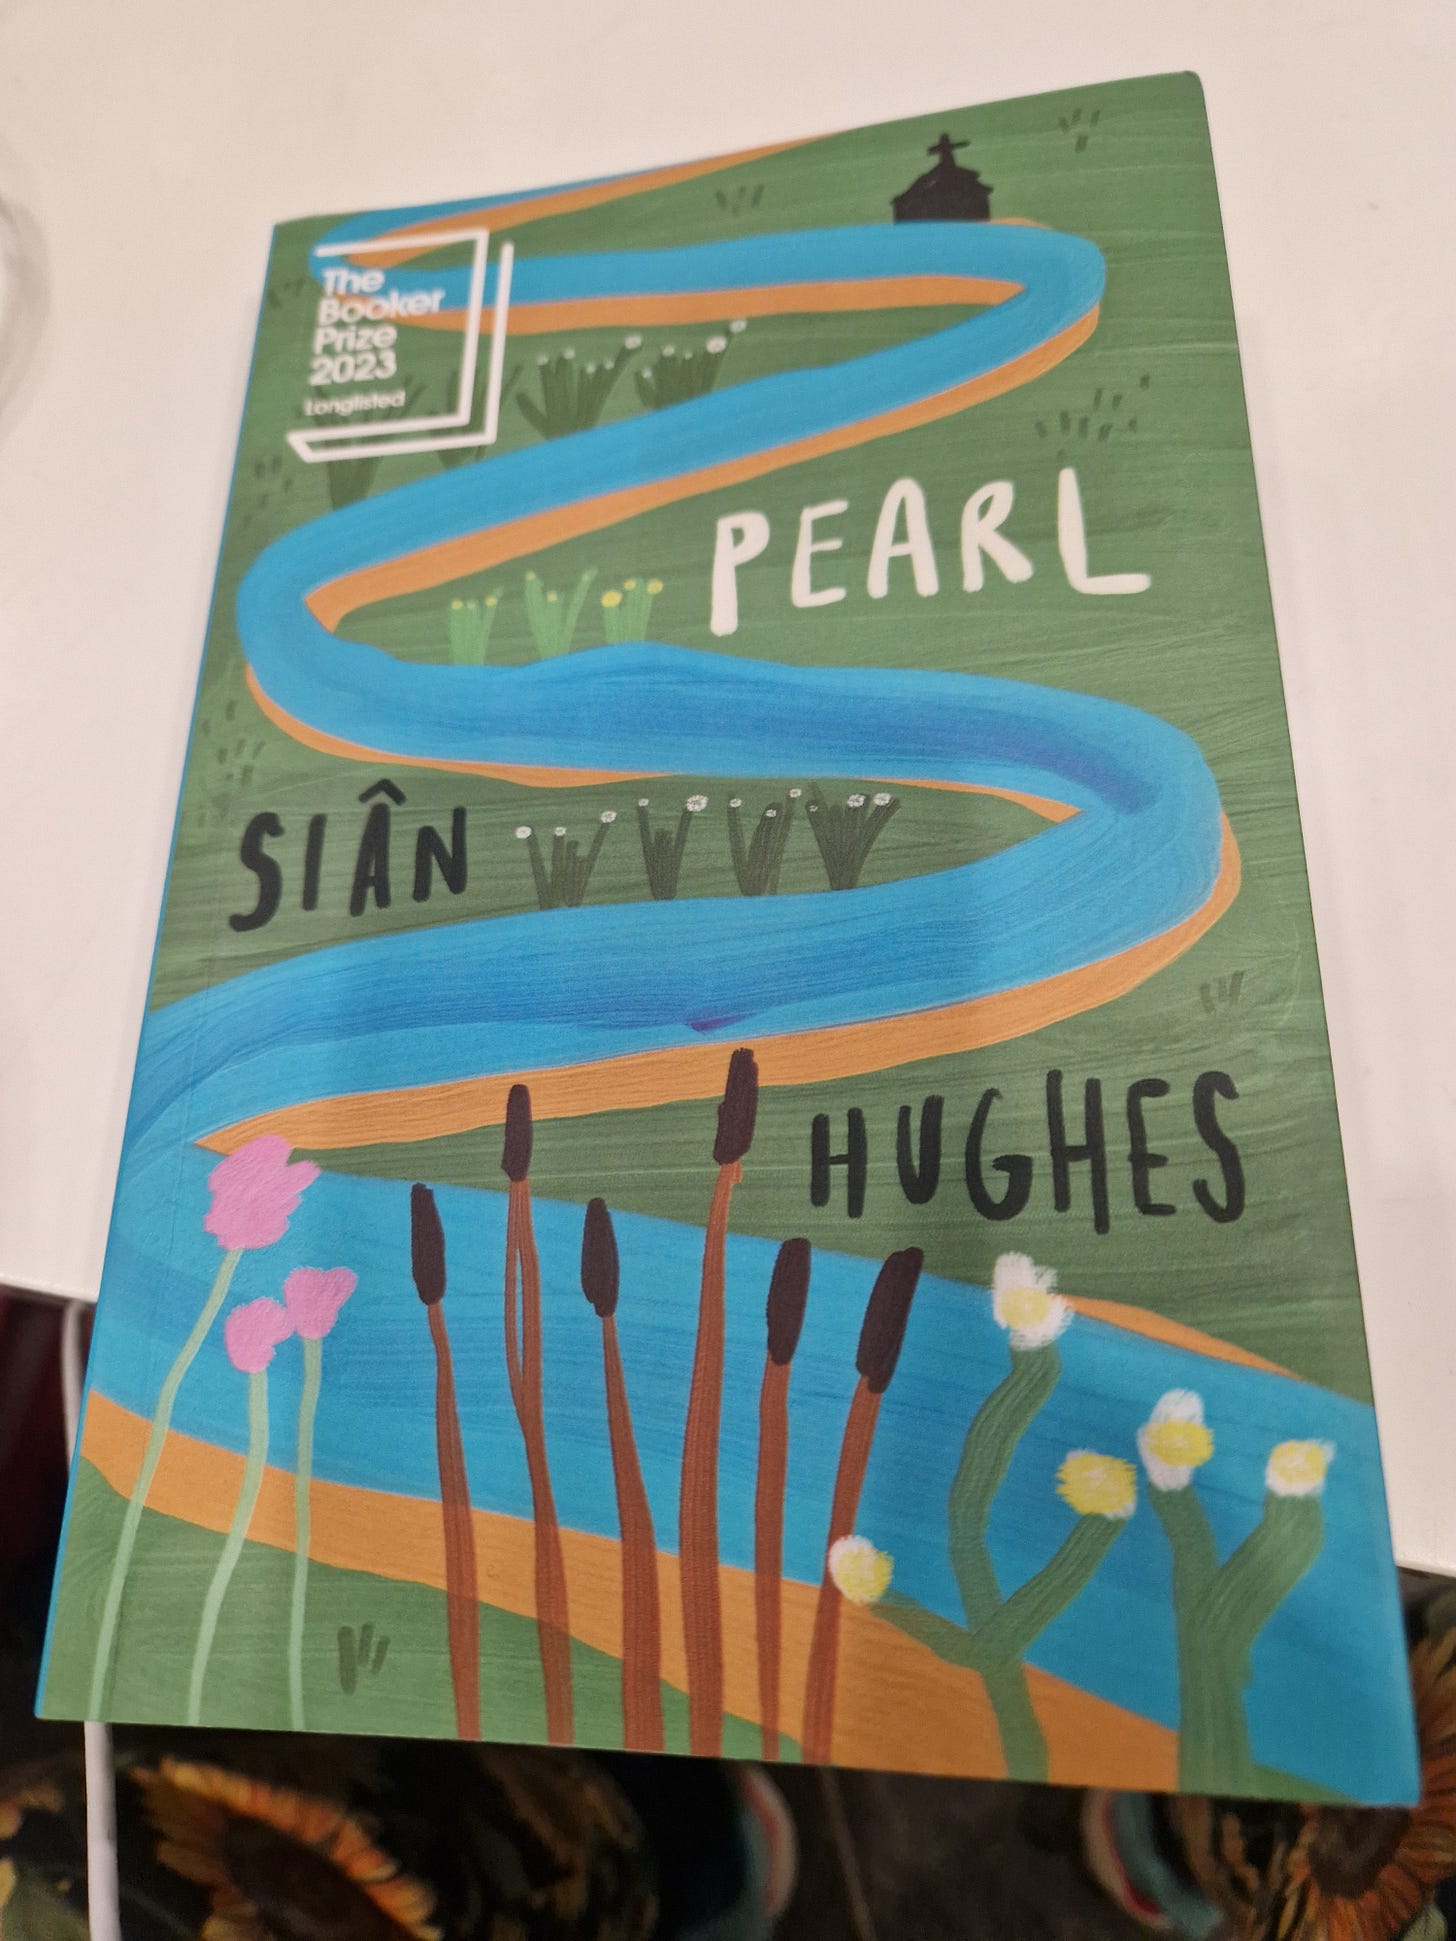 The front cover of 'Pearl' by Sian Hughes